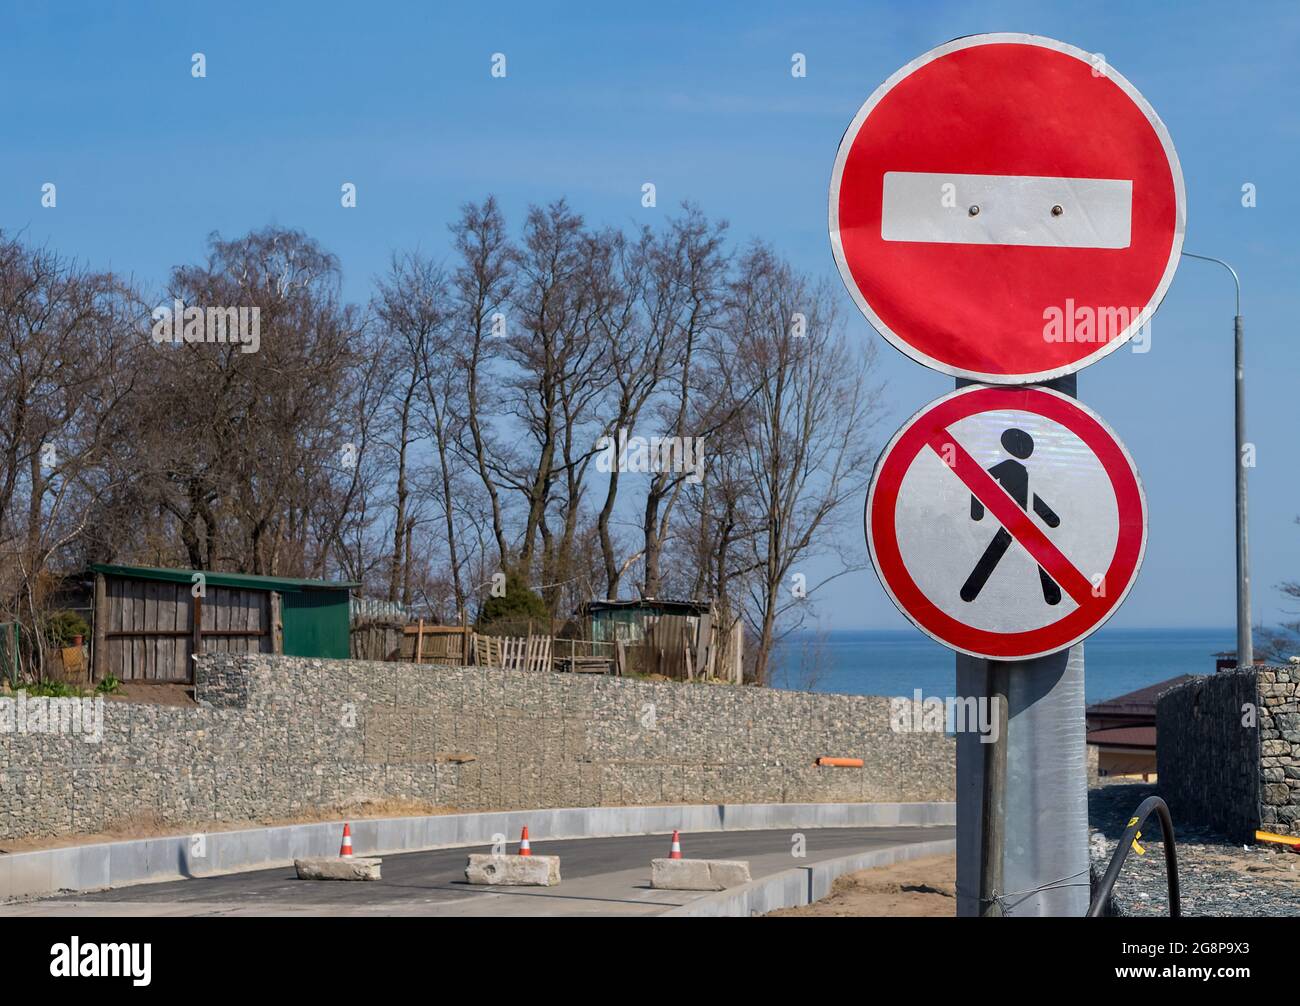 https://c8.alamy.com/comp/2G8P9X3/traffic-is-not-permitted-road-signs-passage-is-forbidden-road-repairs-2G8P9X3.jpg